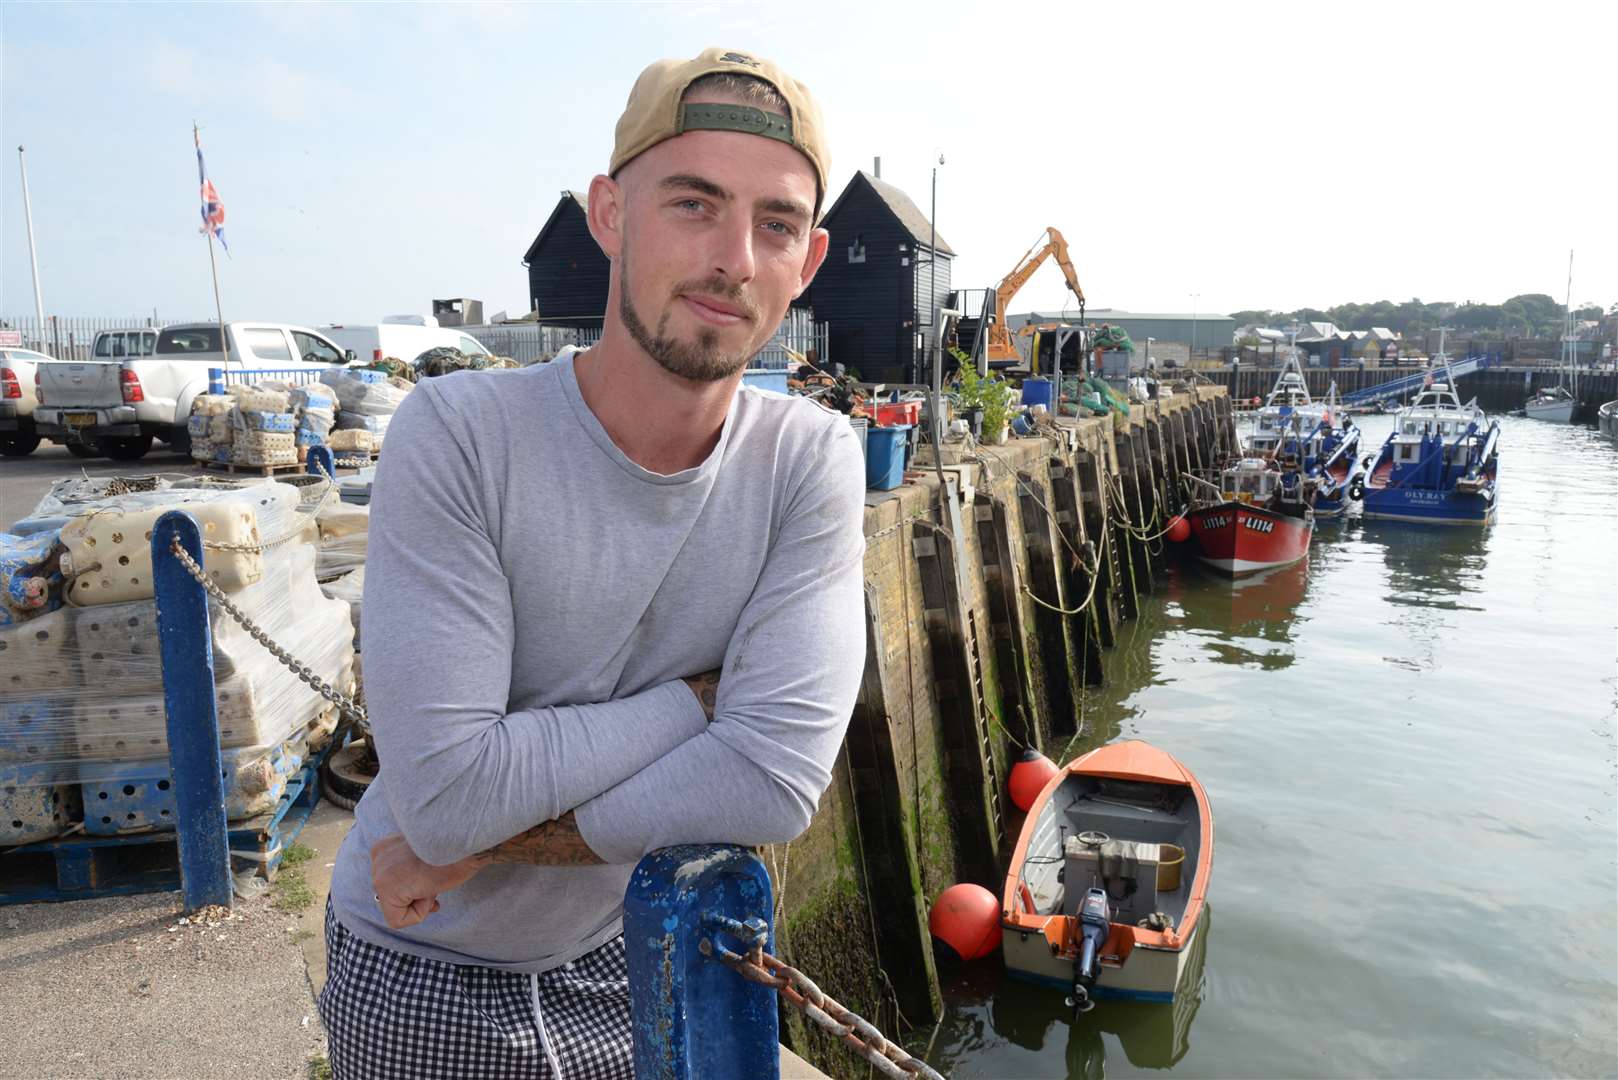 Fisherman Richard Foad says the proposed fee is unfair